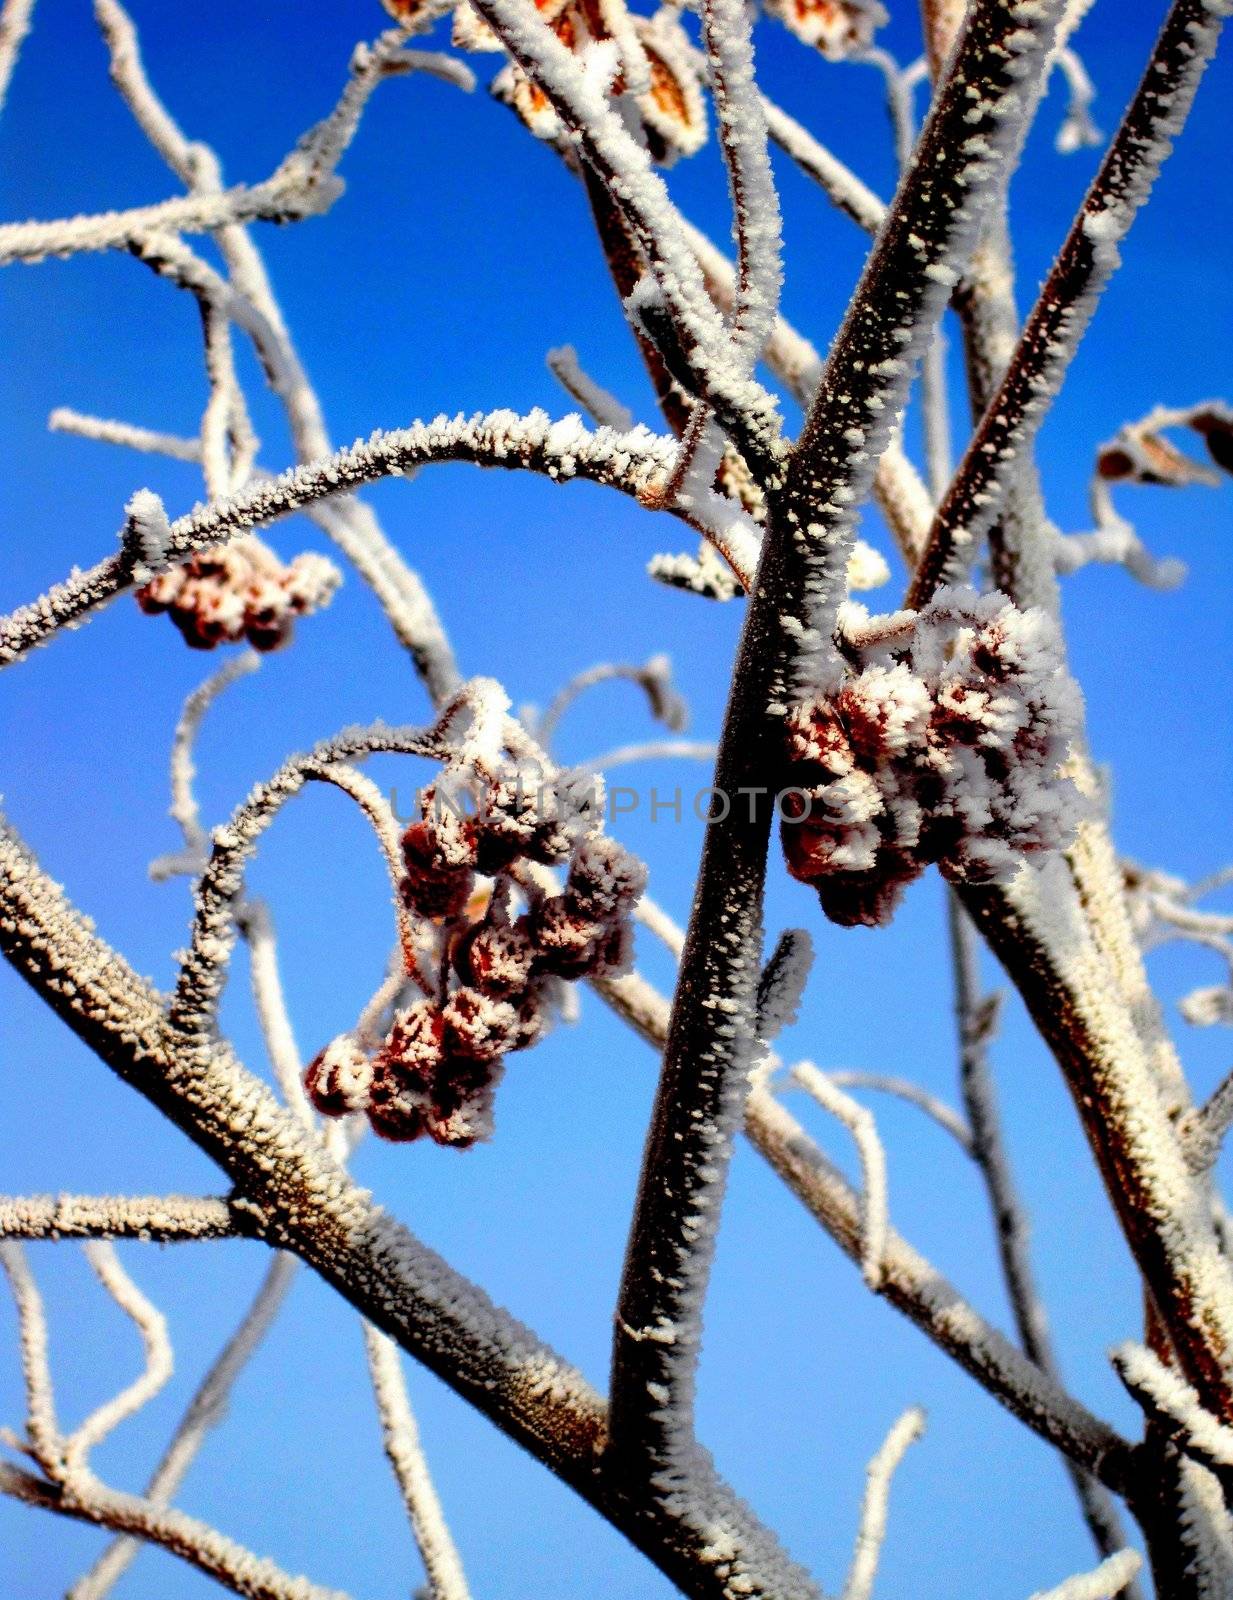 Red shriveled up berries covered in hoar frost under a blue sky.